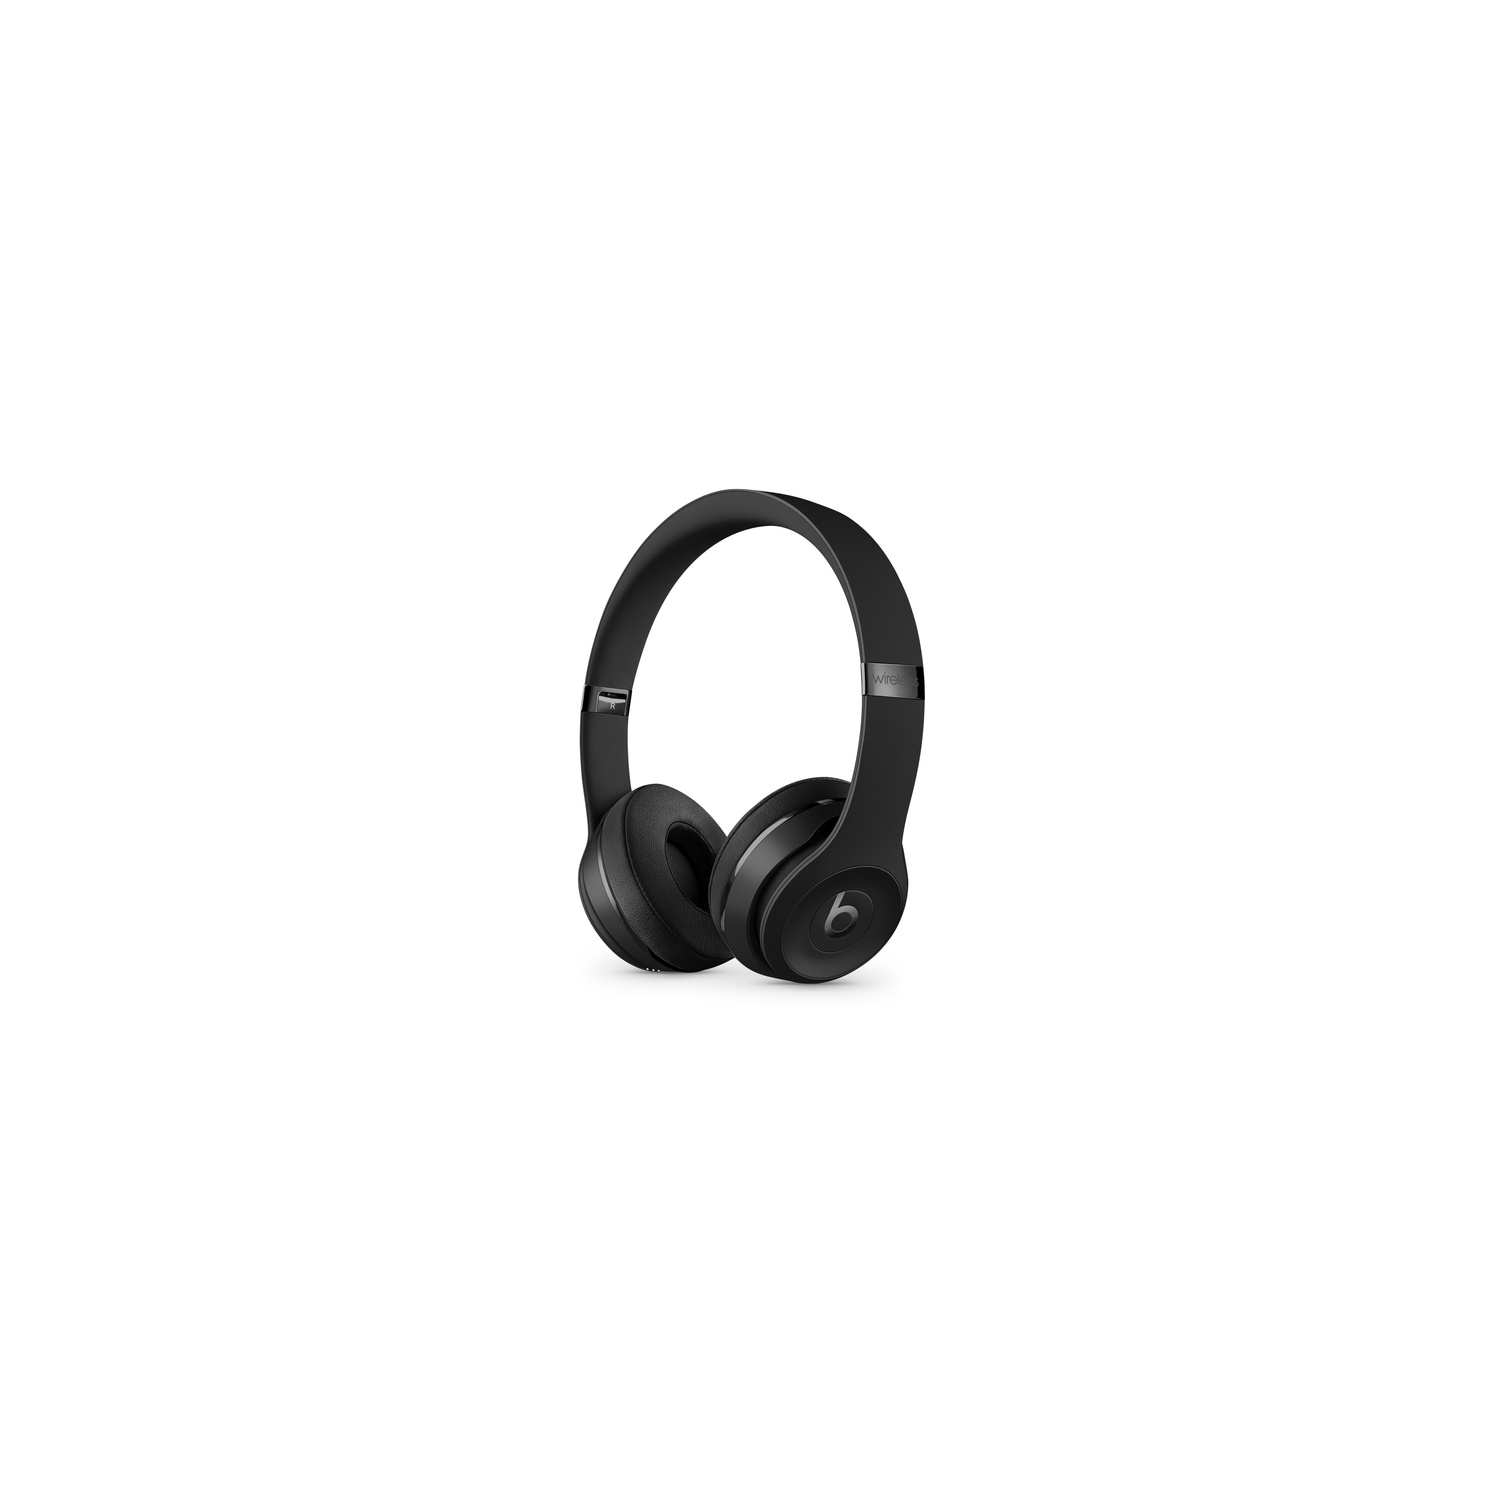 Refurbished (Good) - Beats by Dr. Dre Solo3 On-Ear Sound Isolating Bluetooth Headphones - Black